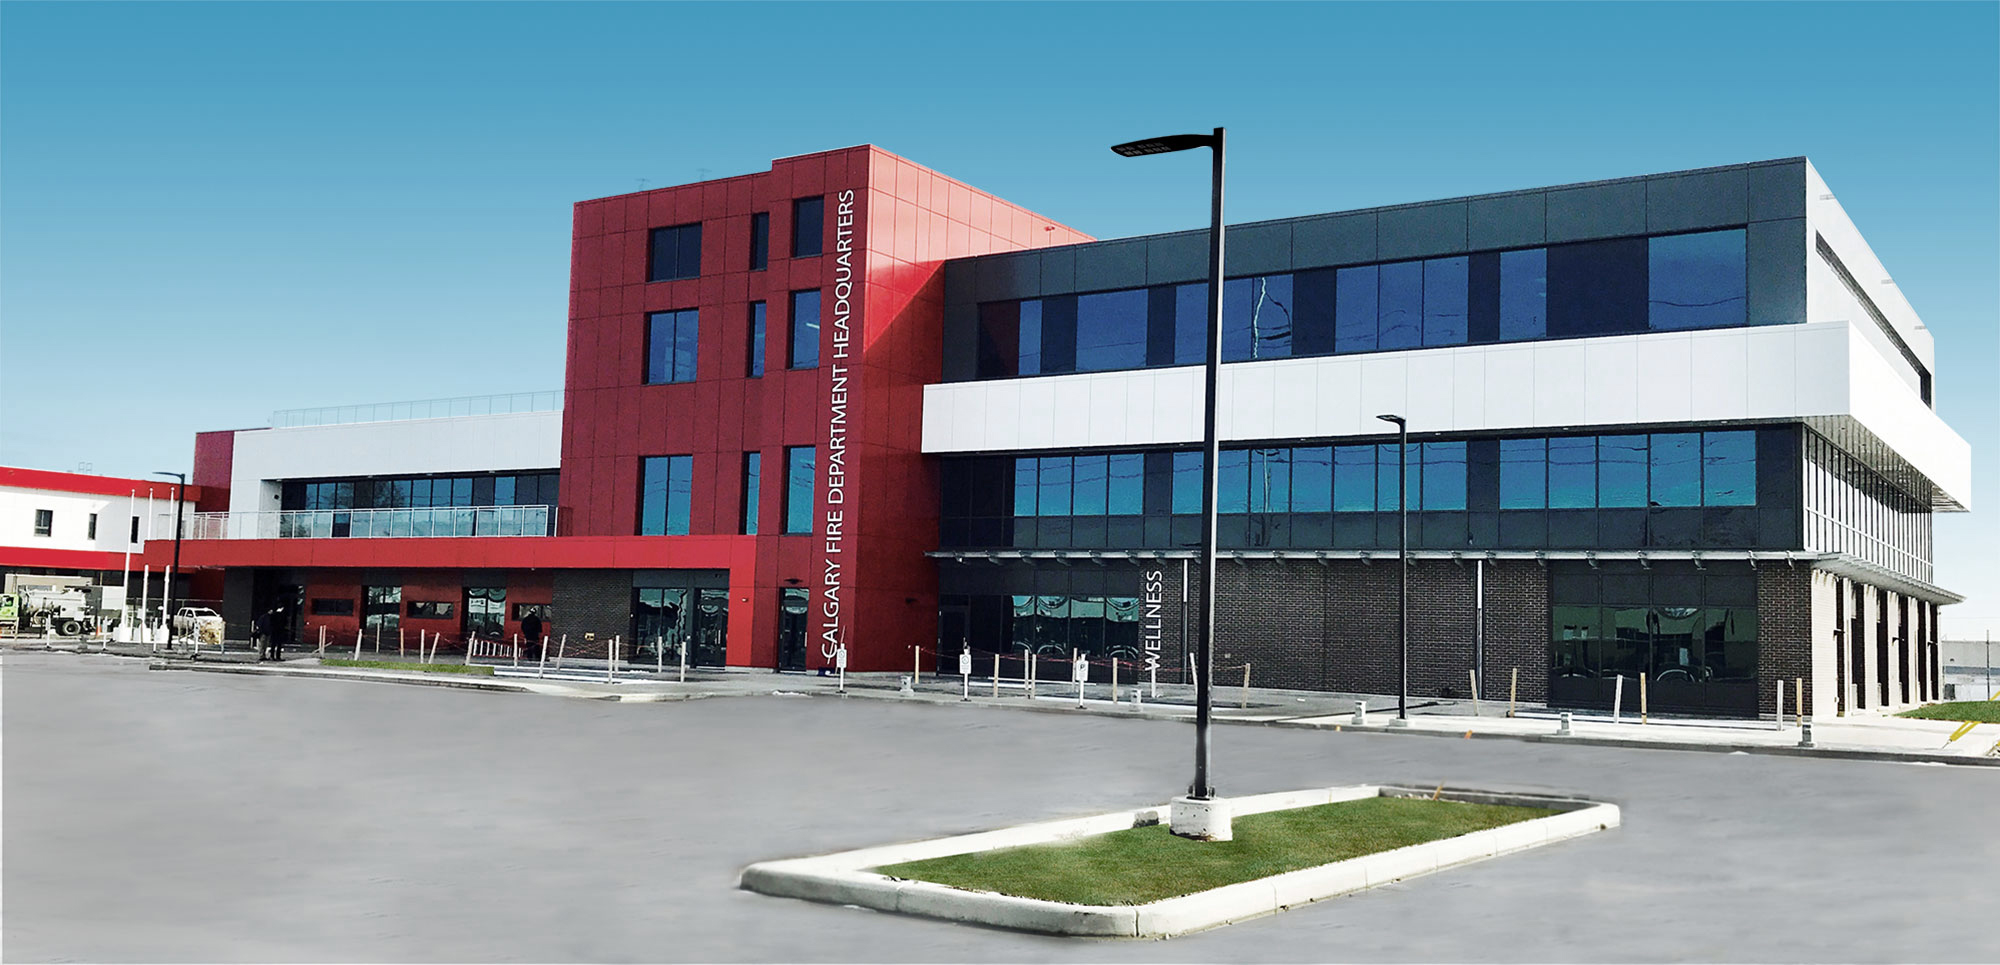 calgary-fire-station-16-and-calgary-fire-department-headquarters-ibi-group